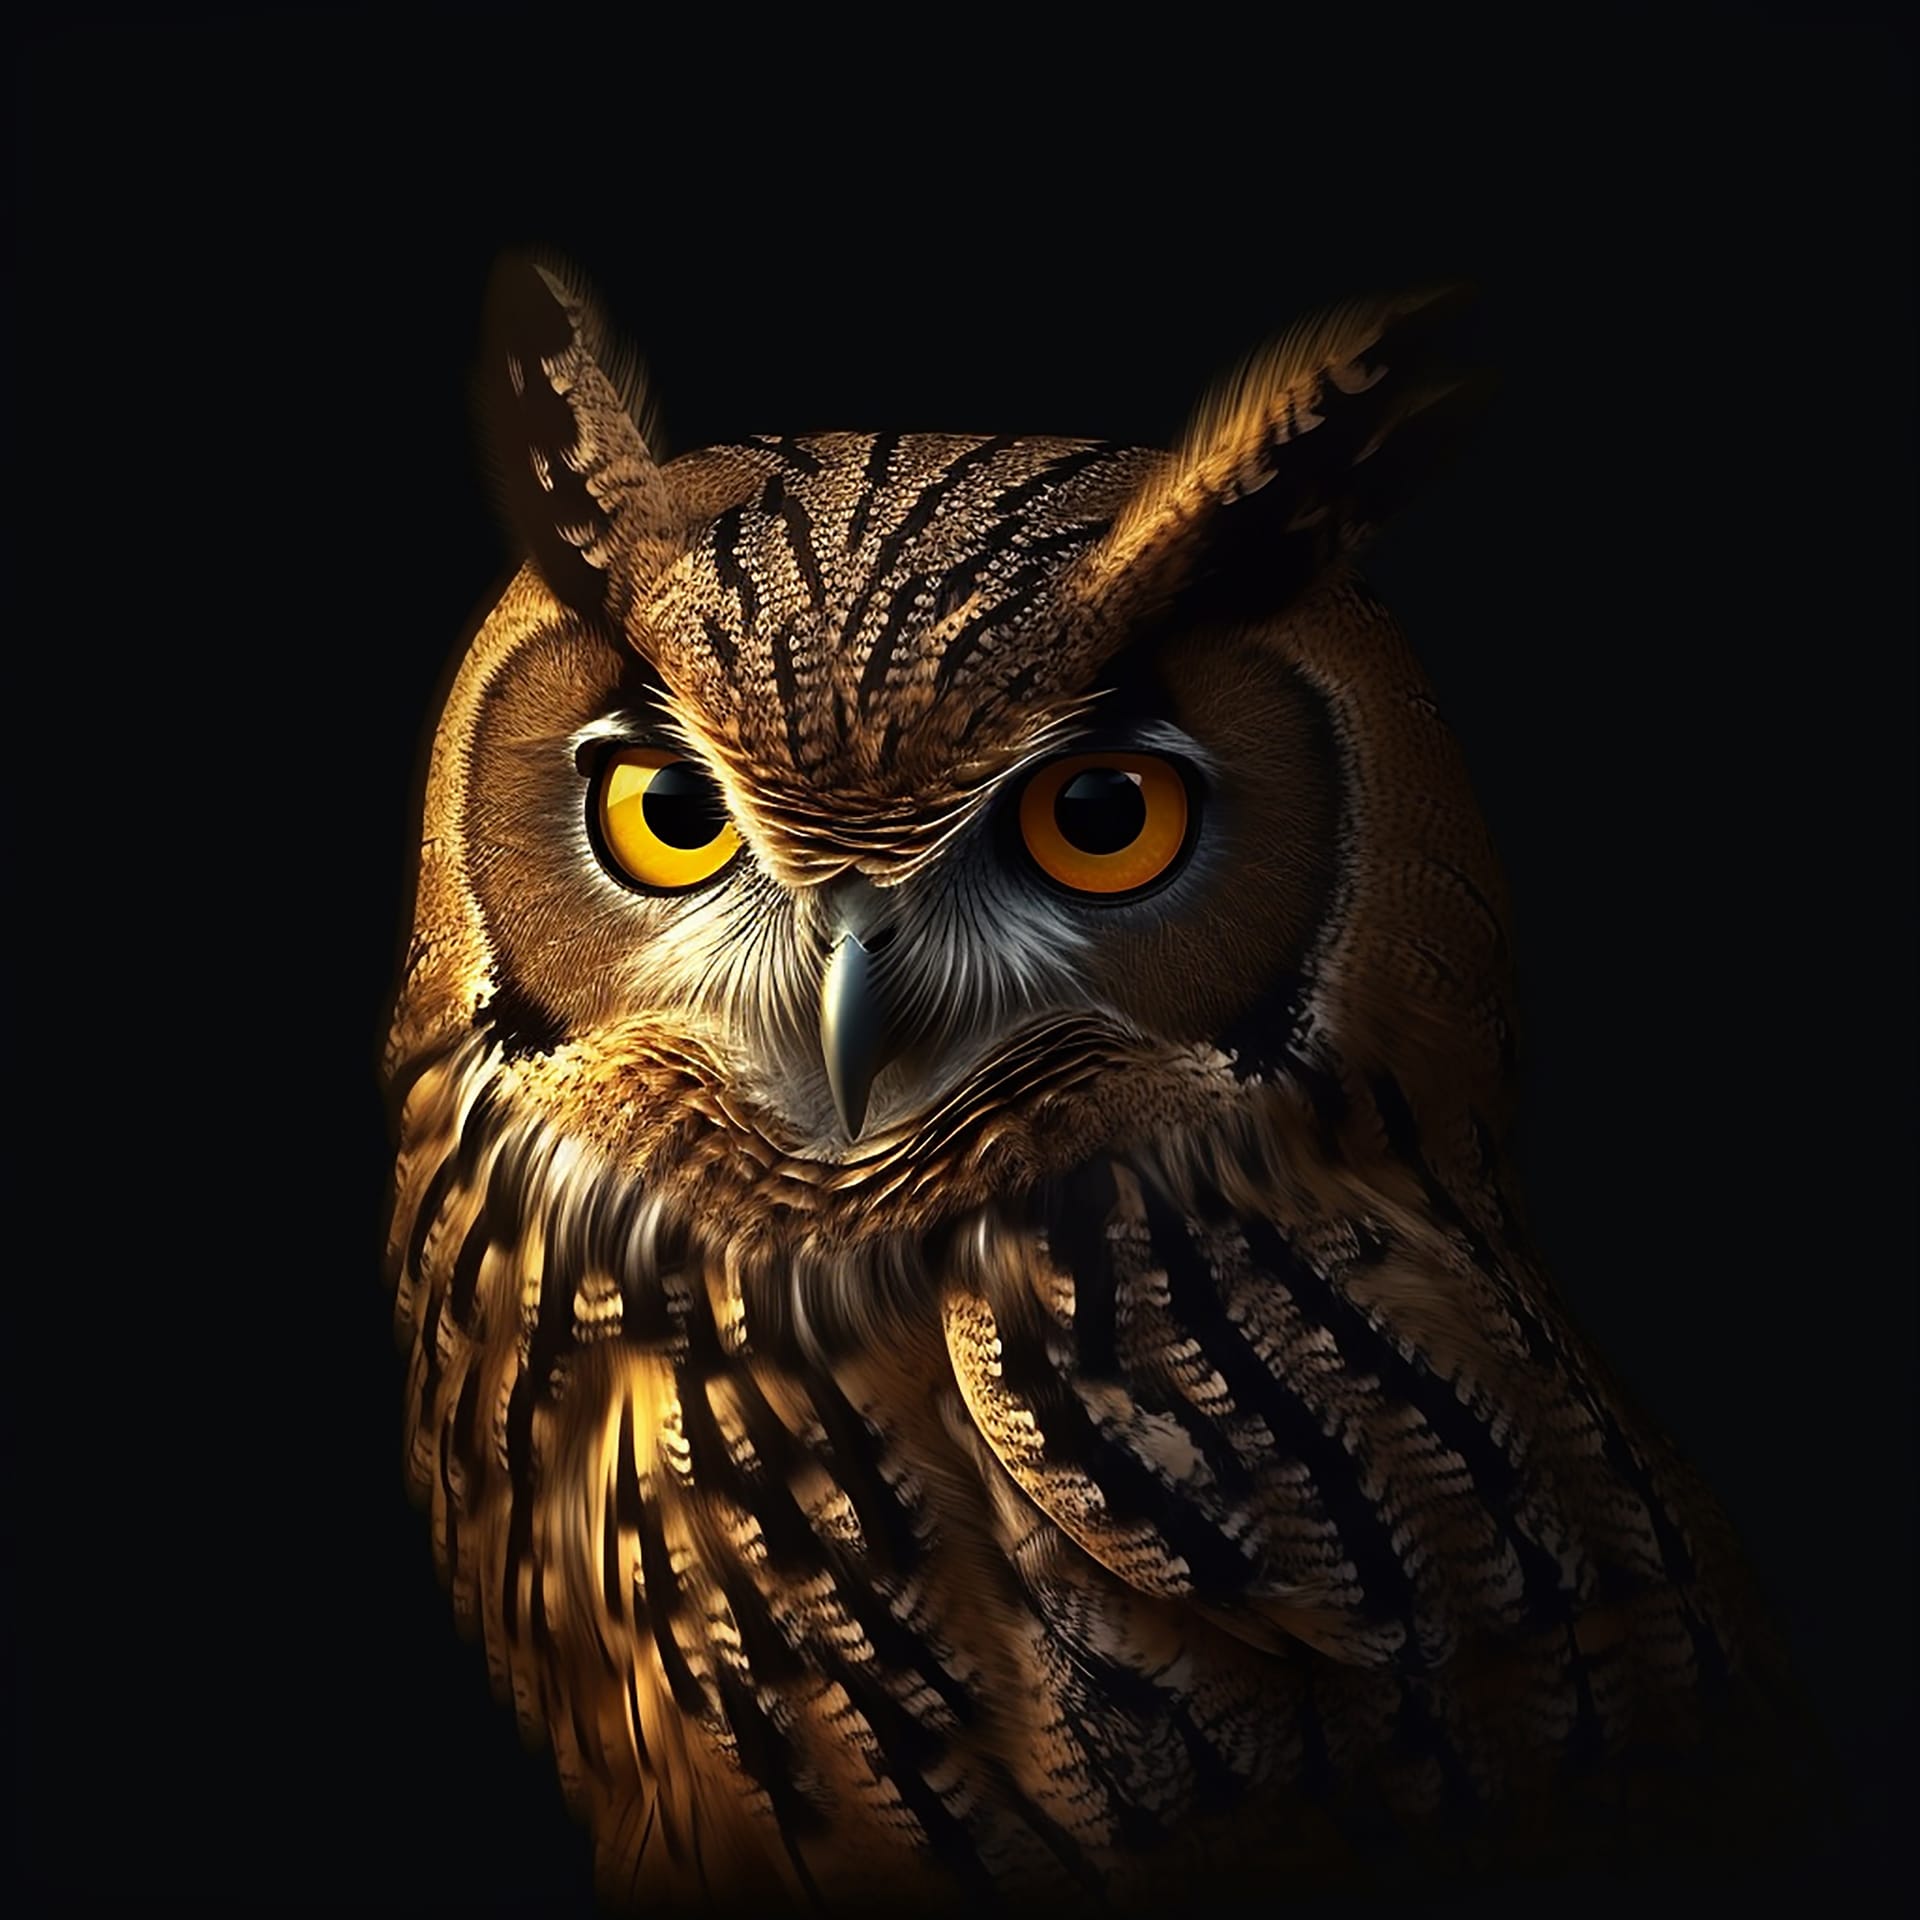 Close up owl with yellow eyes black white feathers